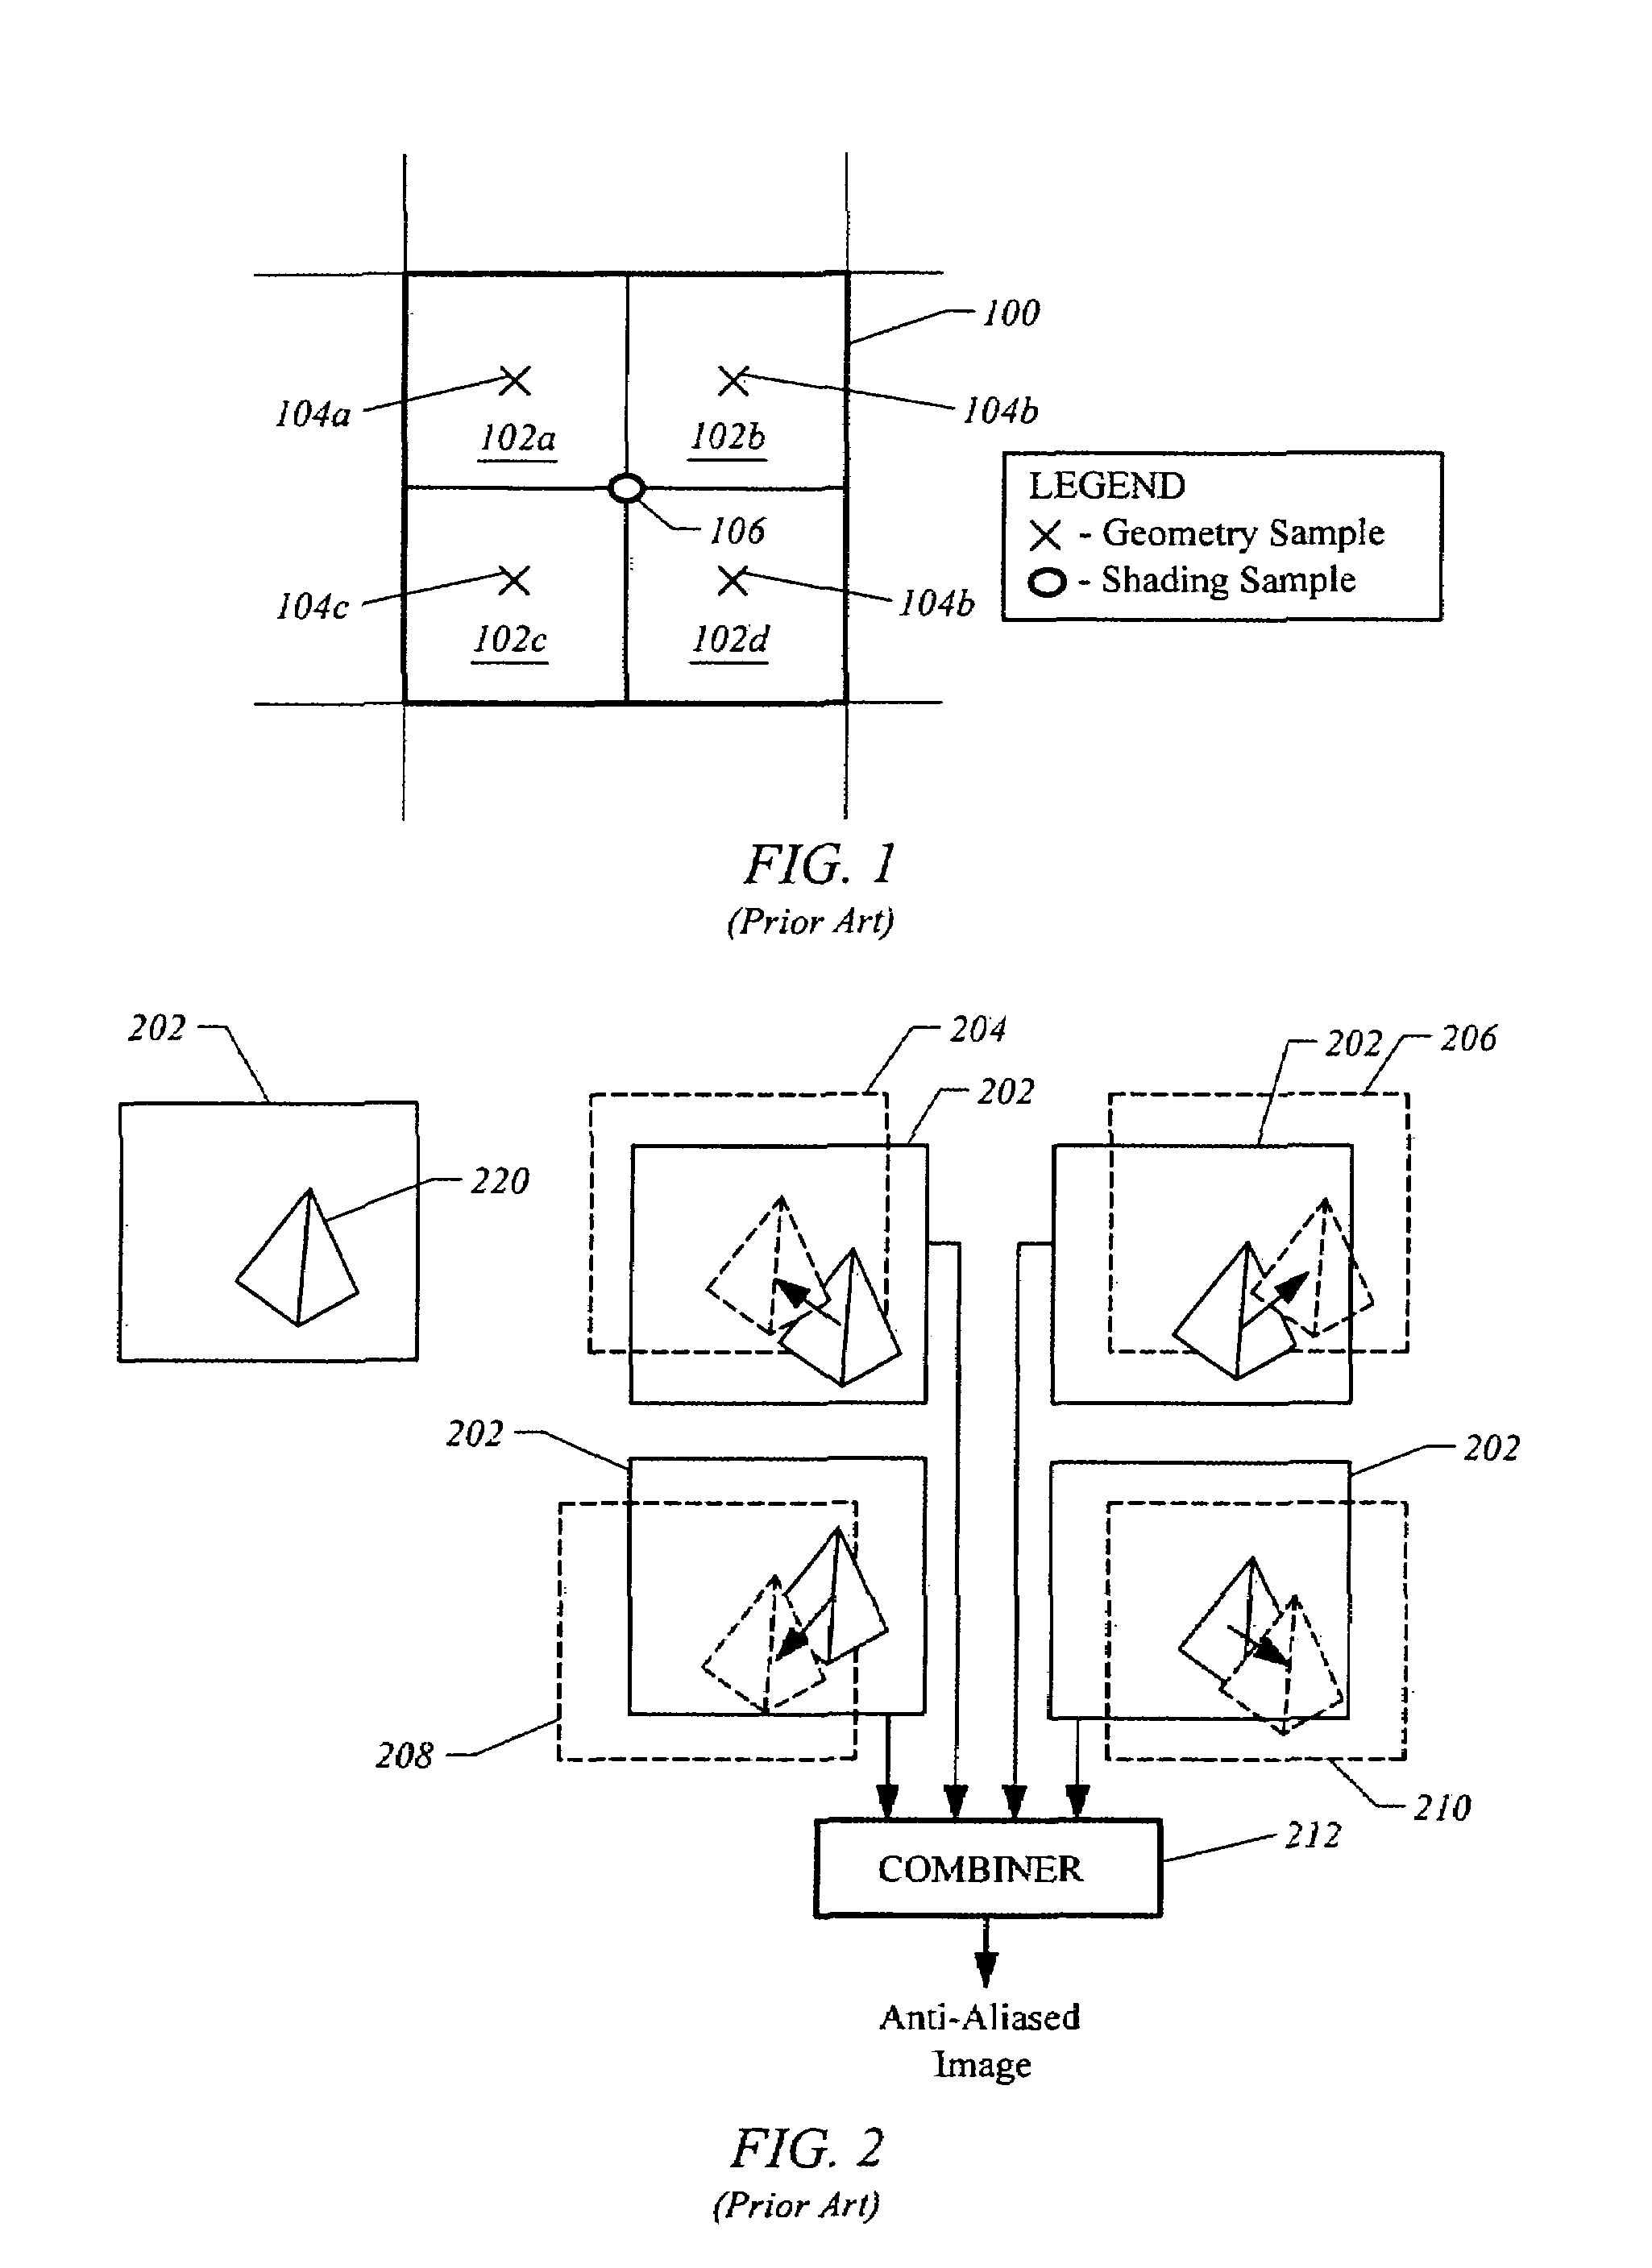 System, apparatus and method for subpixel shifting of sample positions to anti-alias computer-generated images